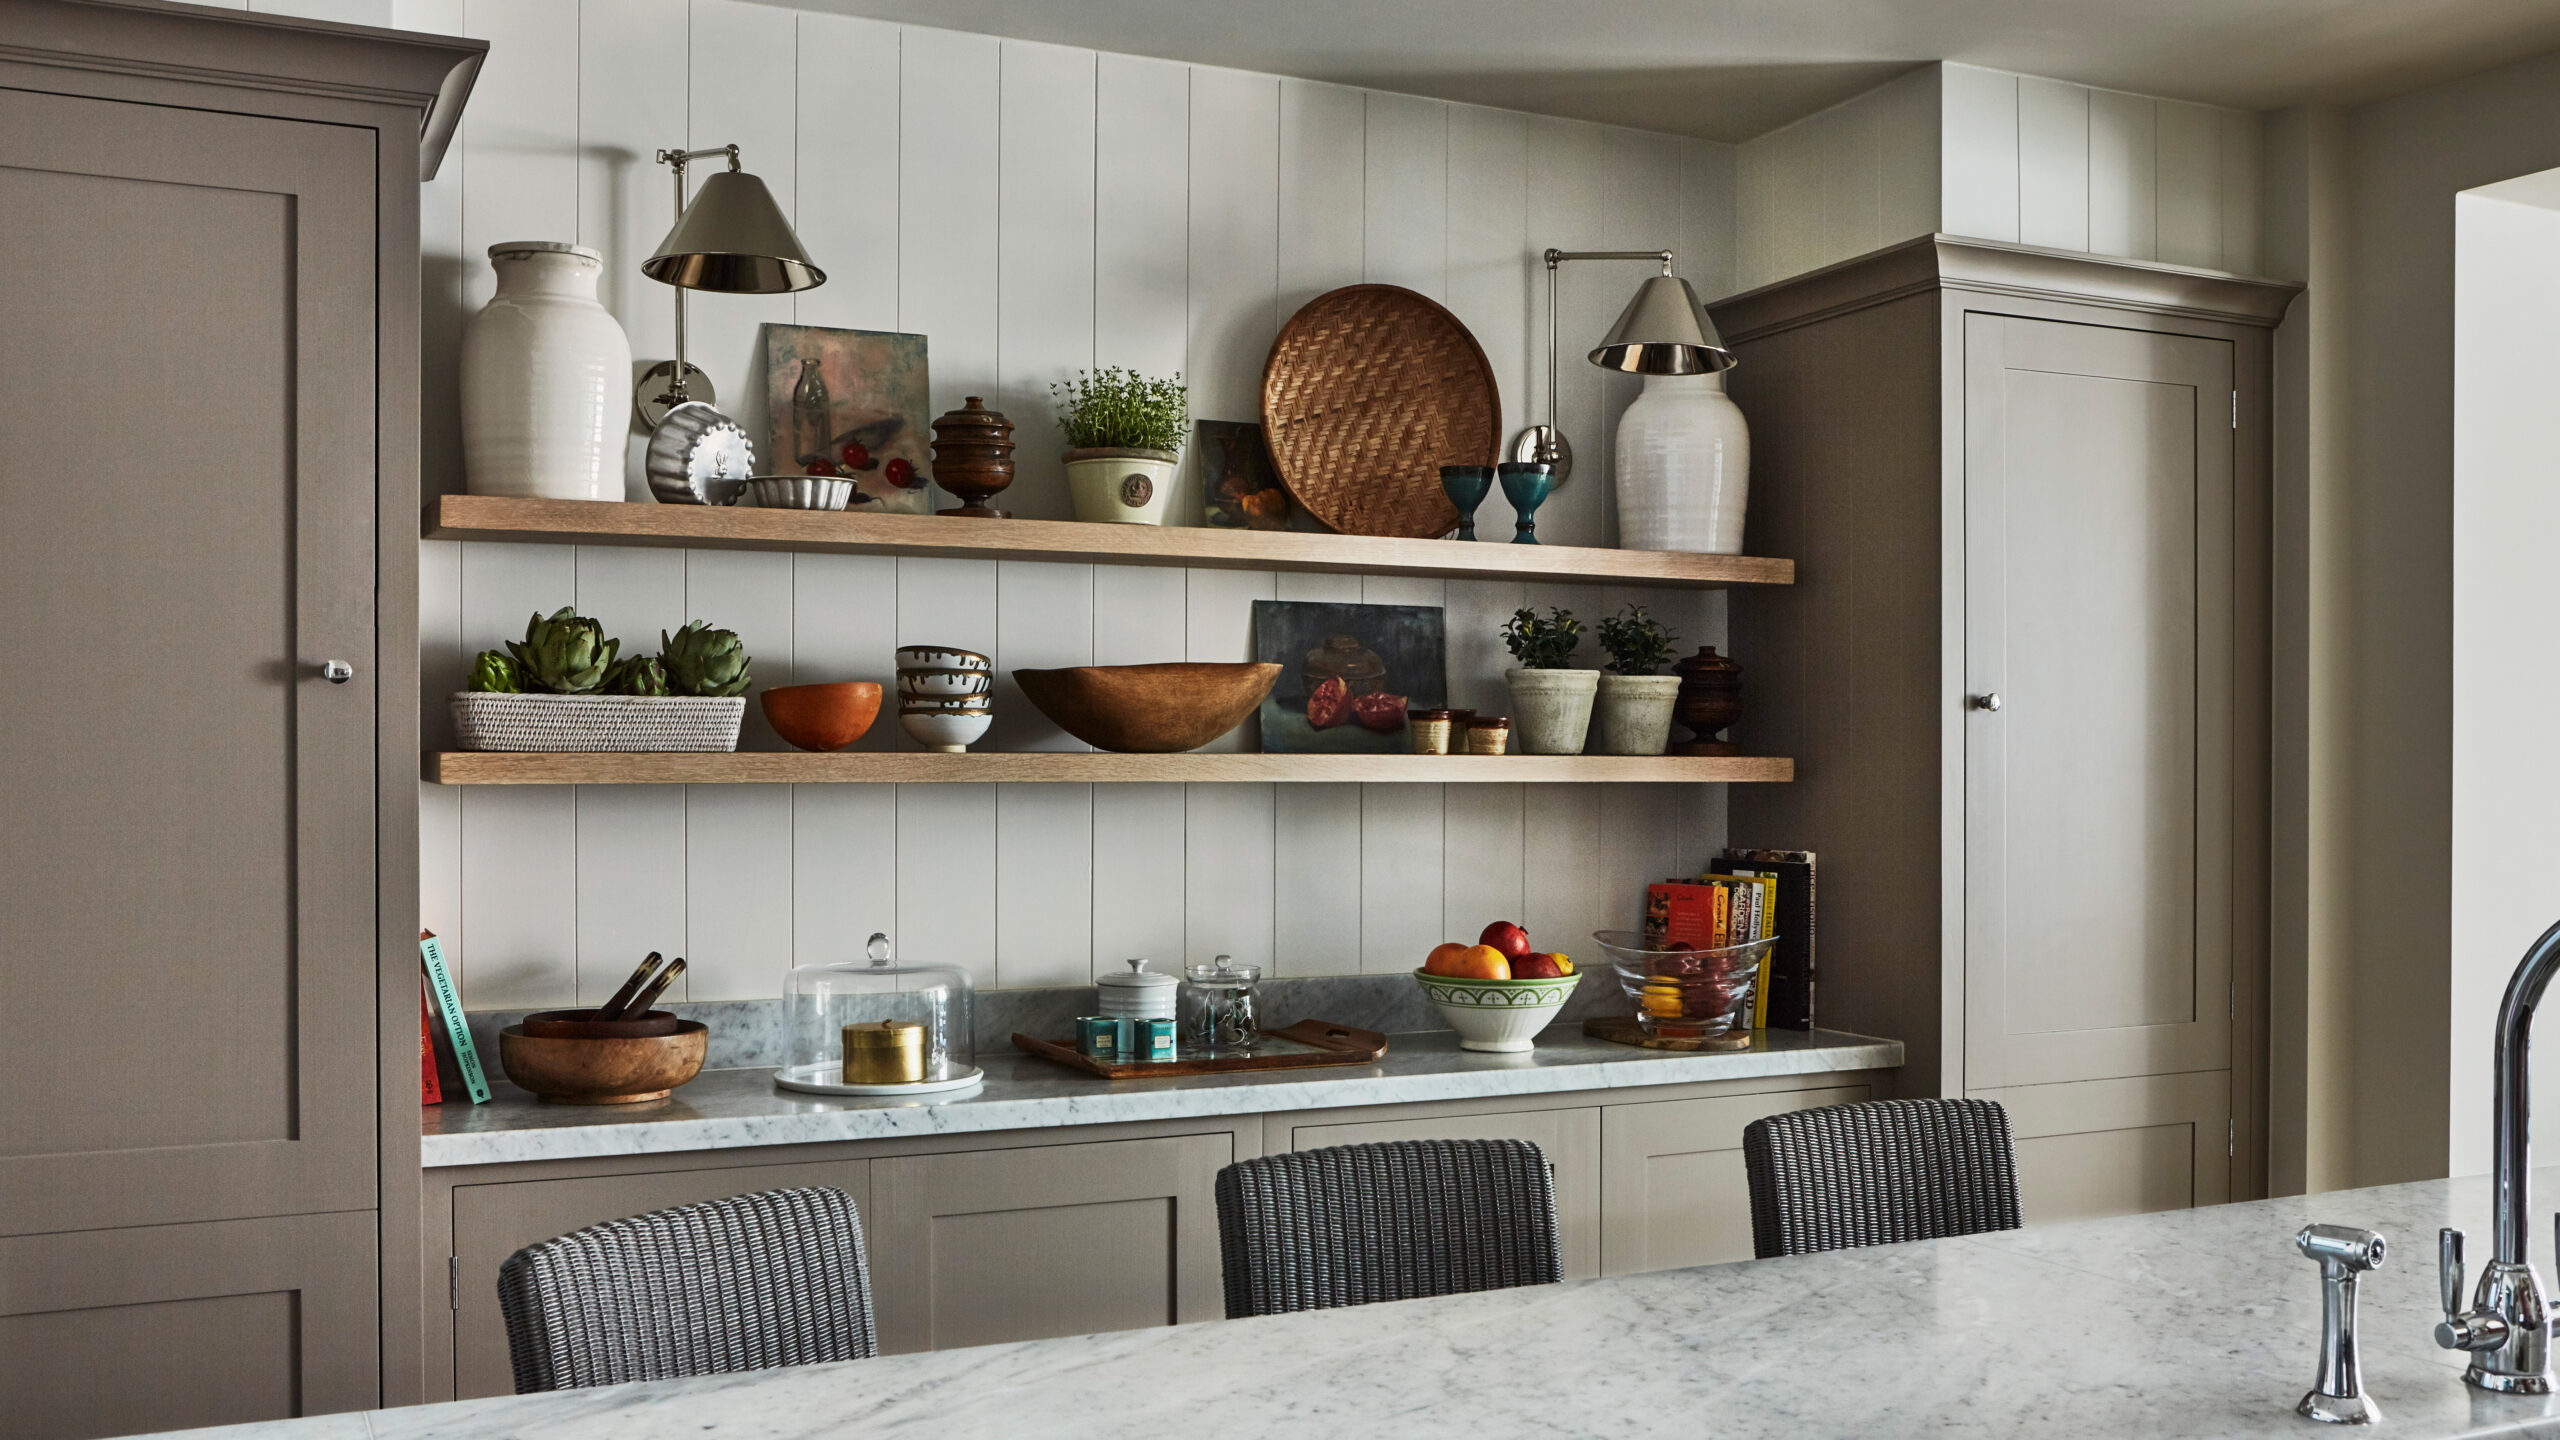 Kitchen shelving ideas:  ways to boost storage and display space